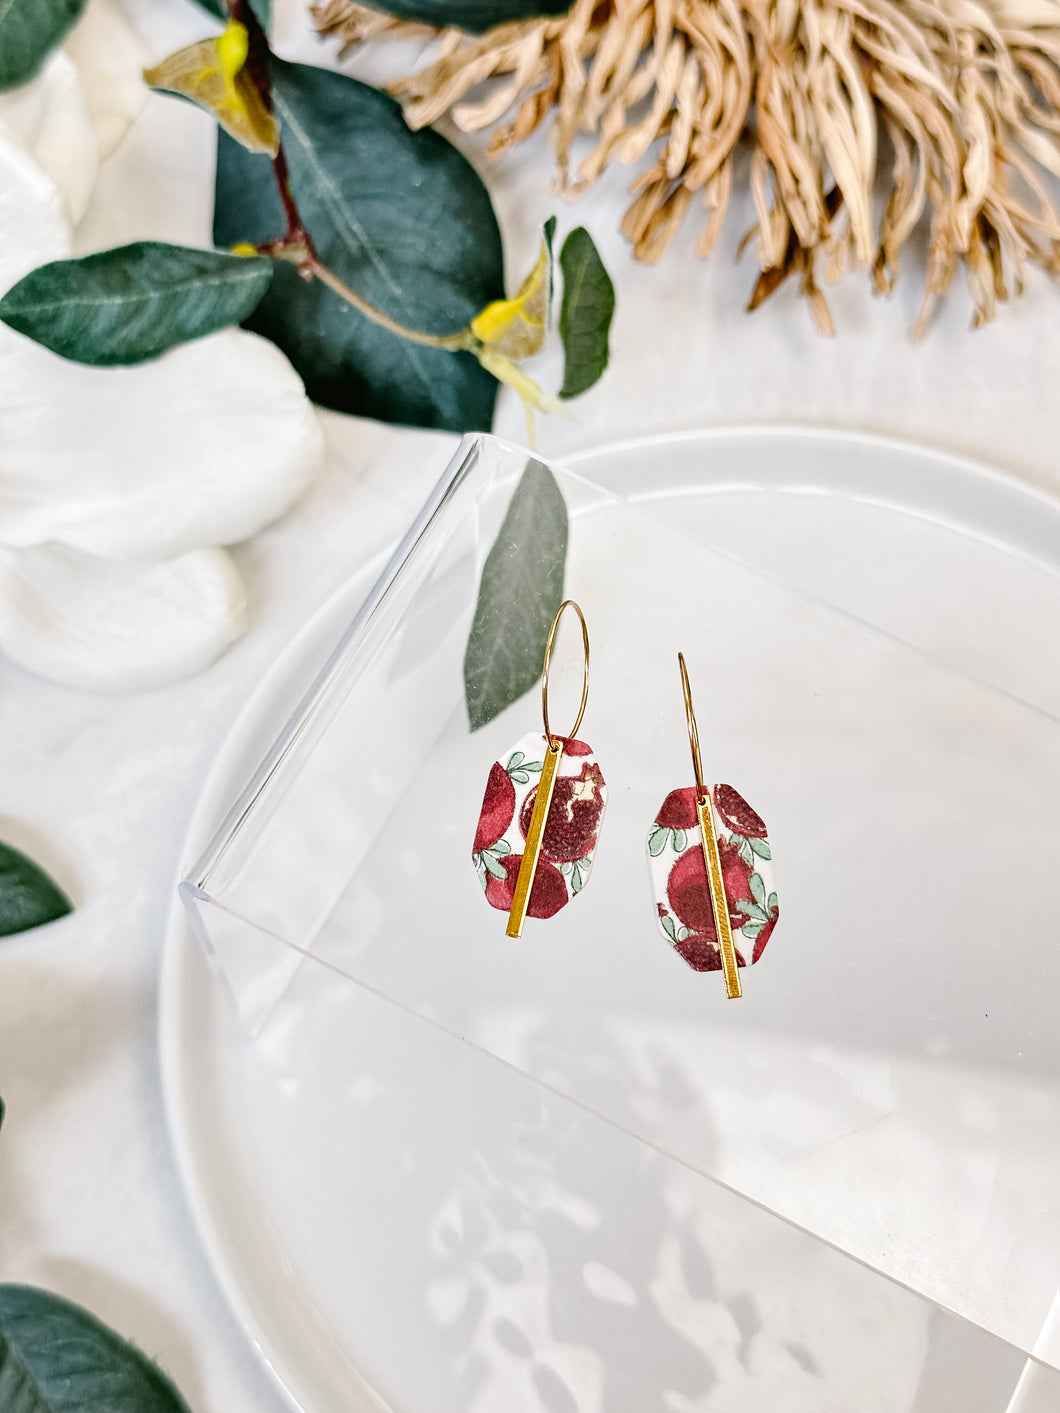 The Pomegranate Hoops